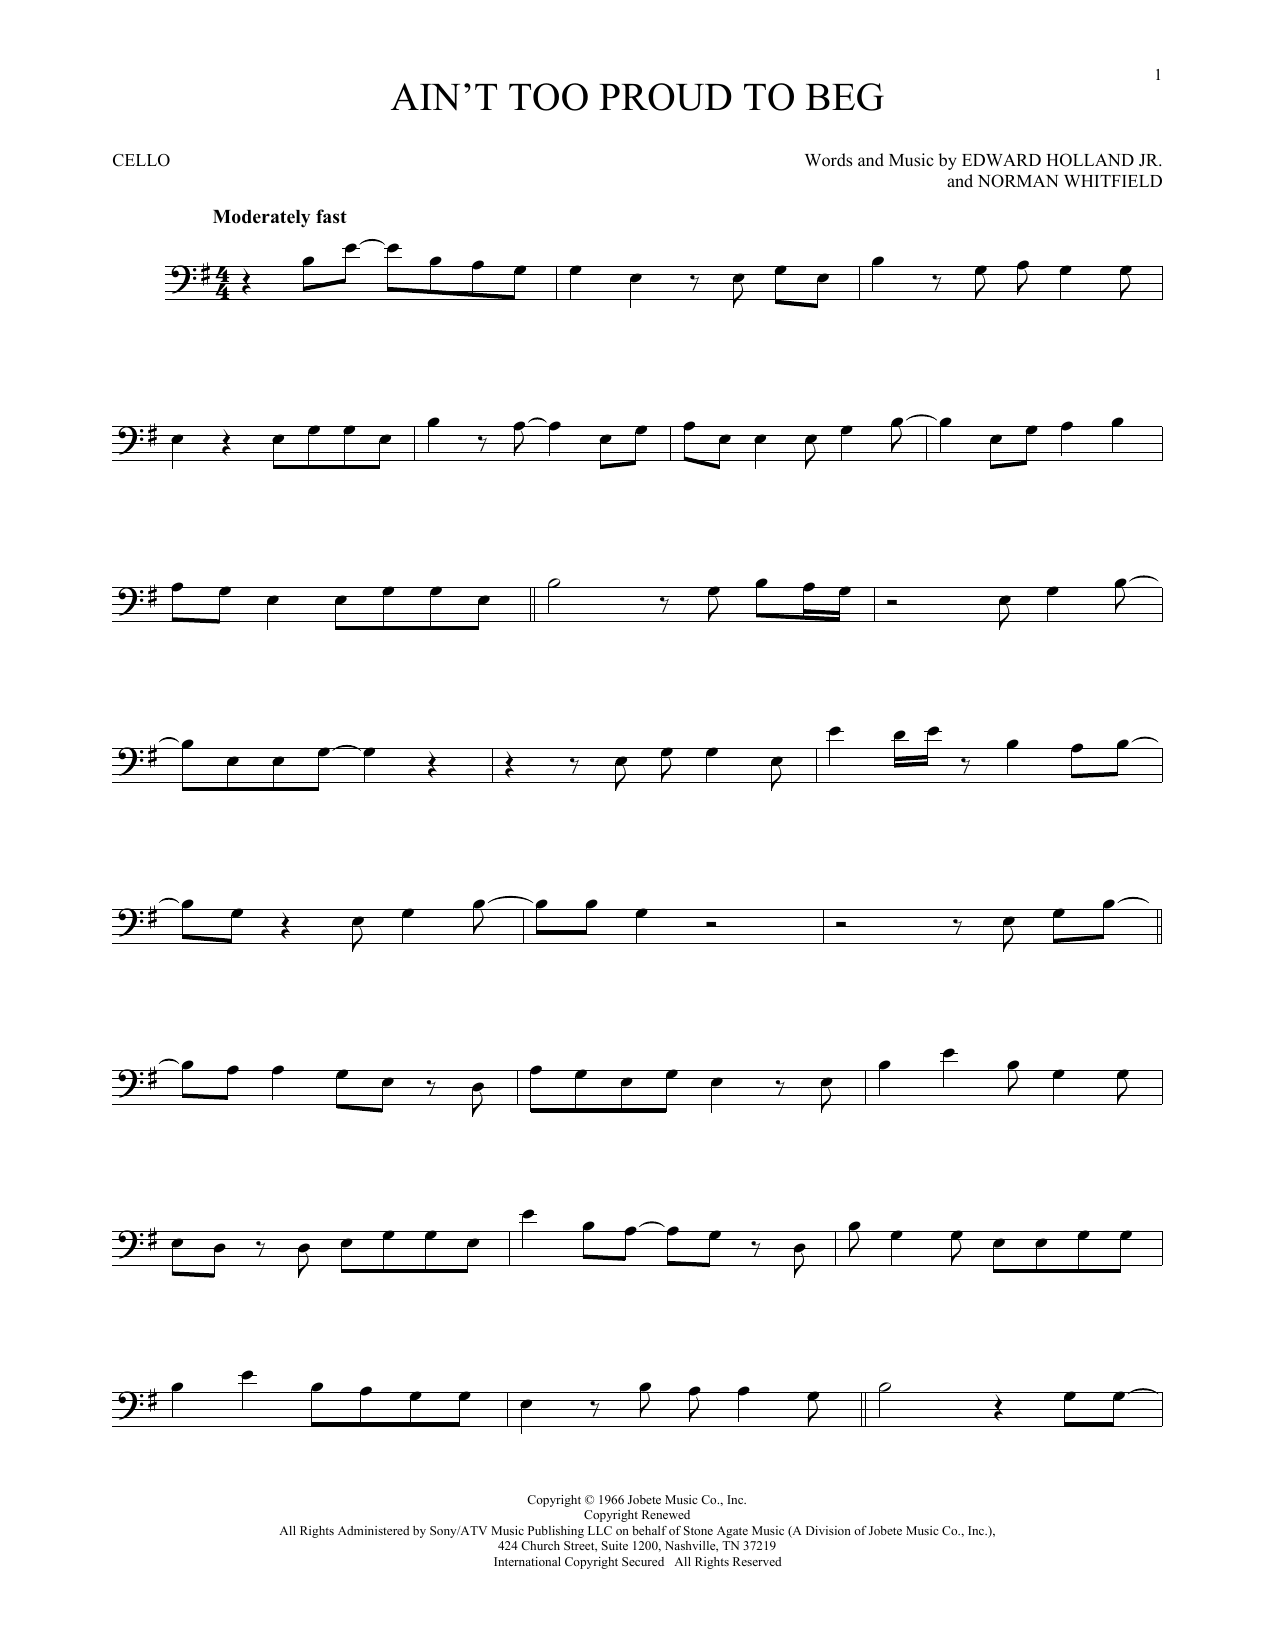 Download The Temptations Ain't Too Proud To Beg Sheet Music